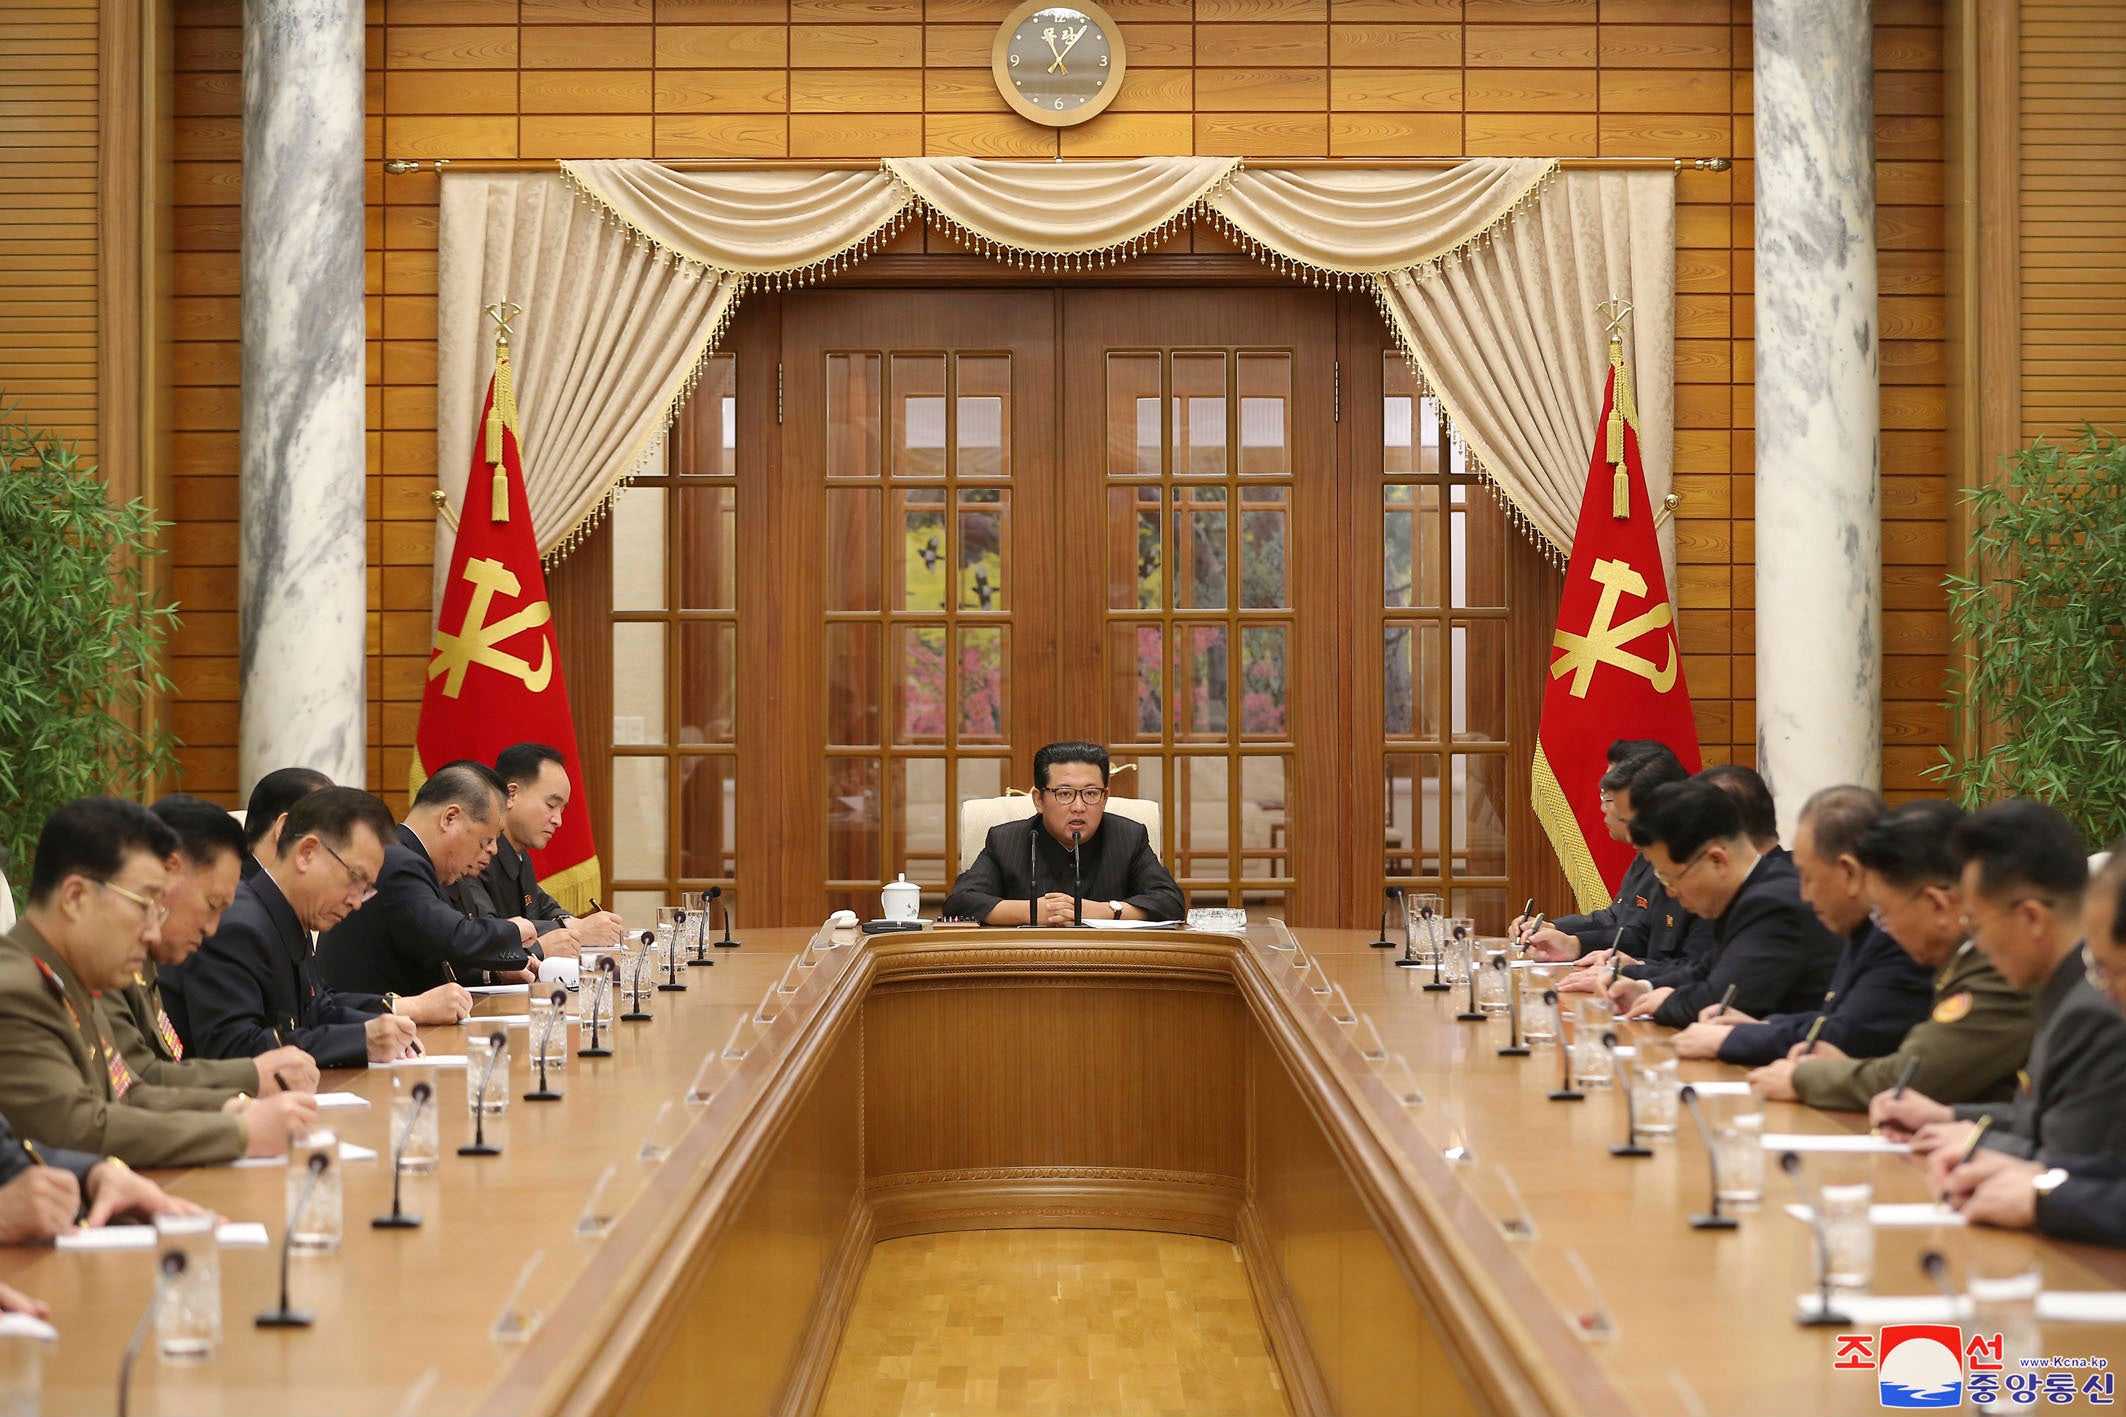 North Korean leader Kim Jong-un, centre, attends a meeting of the Workers’ Party of Korea in Pyongyang